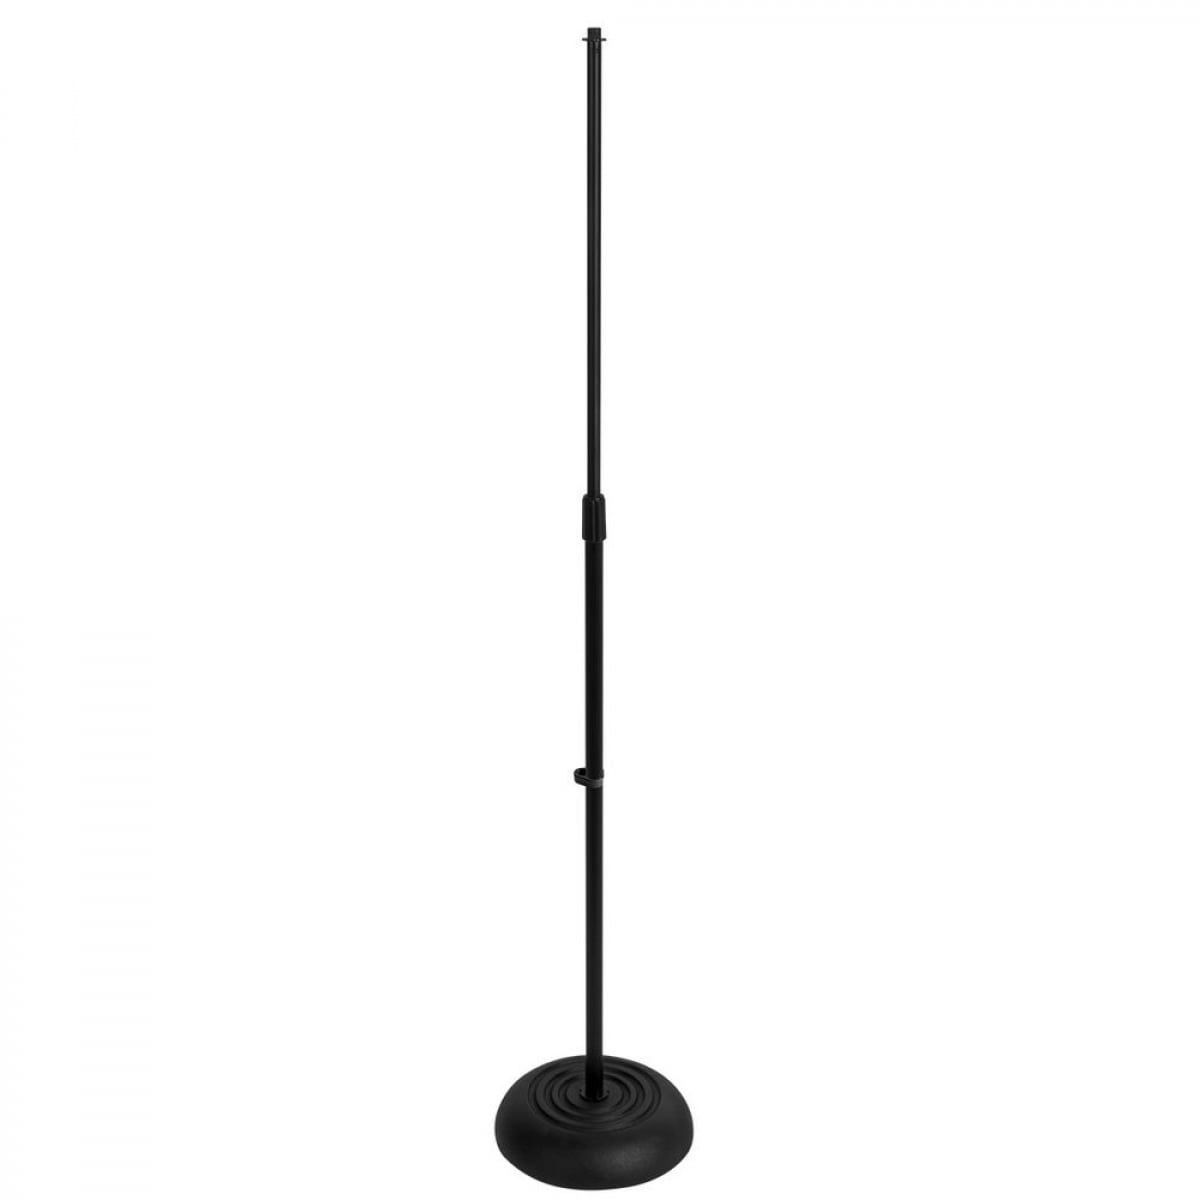 PYLE COMPACT BASE BLACK MICROPHONE STAND #PMKS5-{NEW-IN-BOX} 